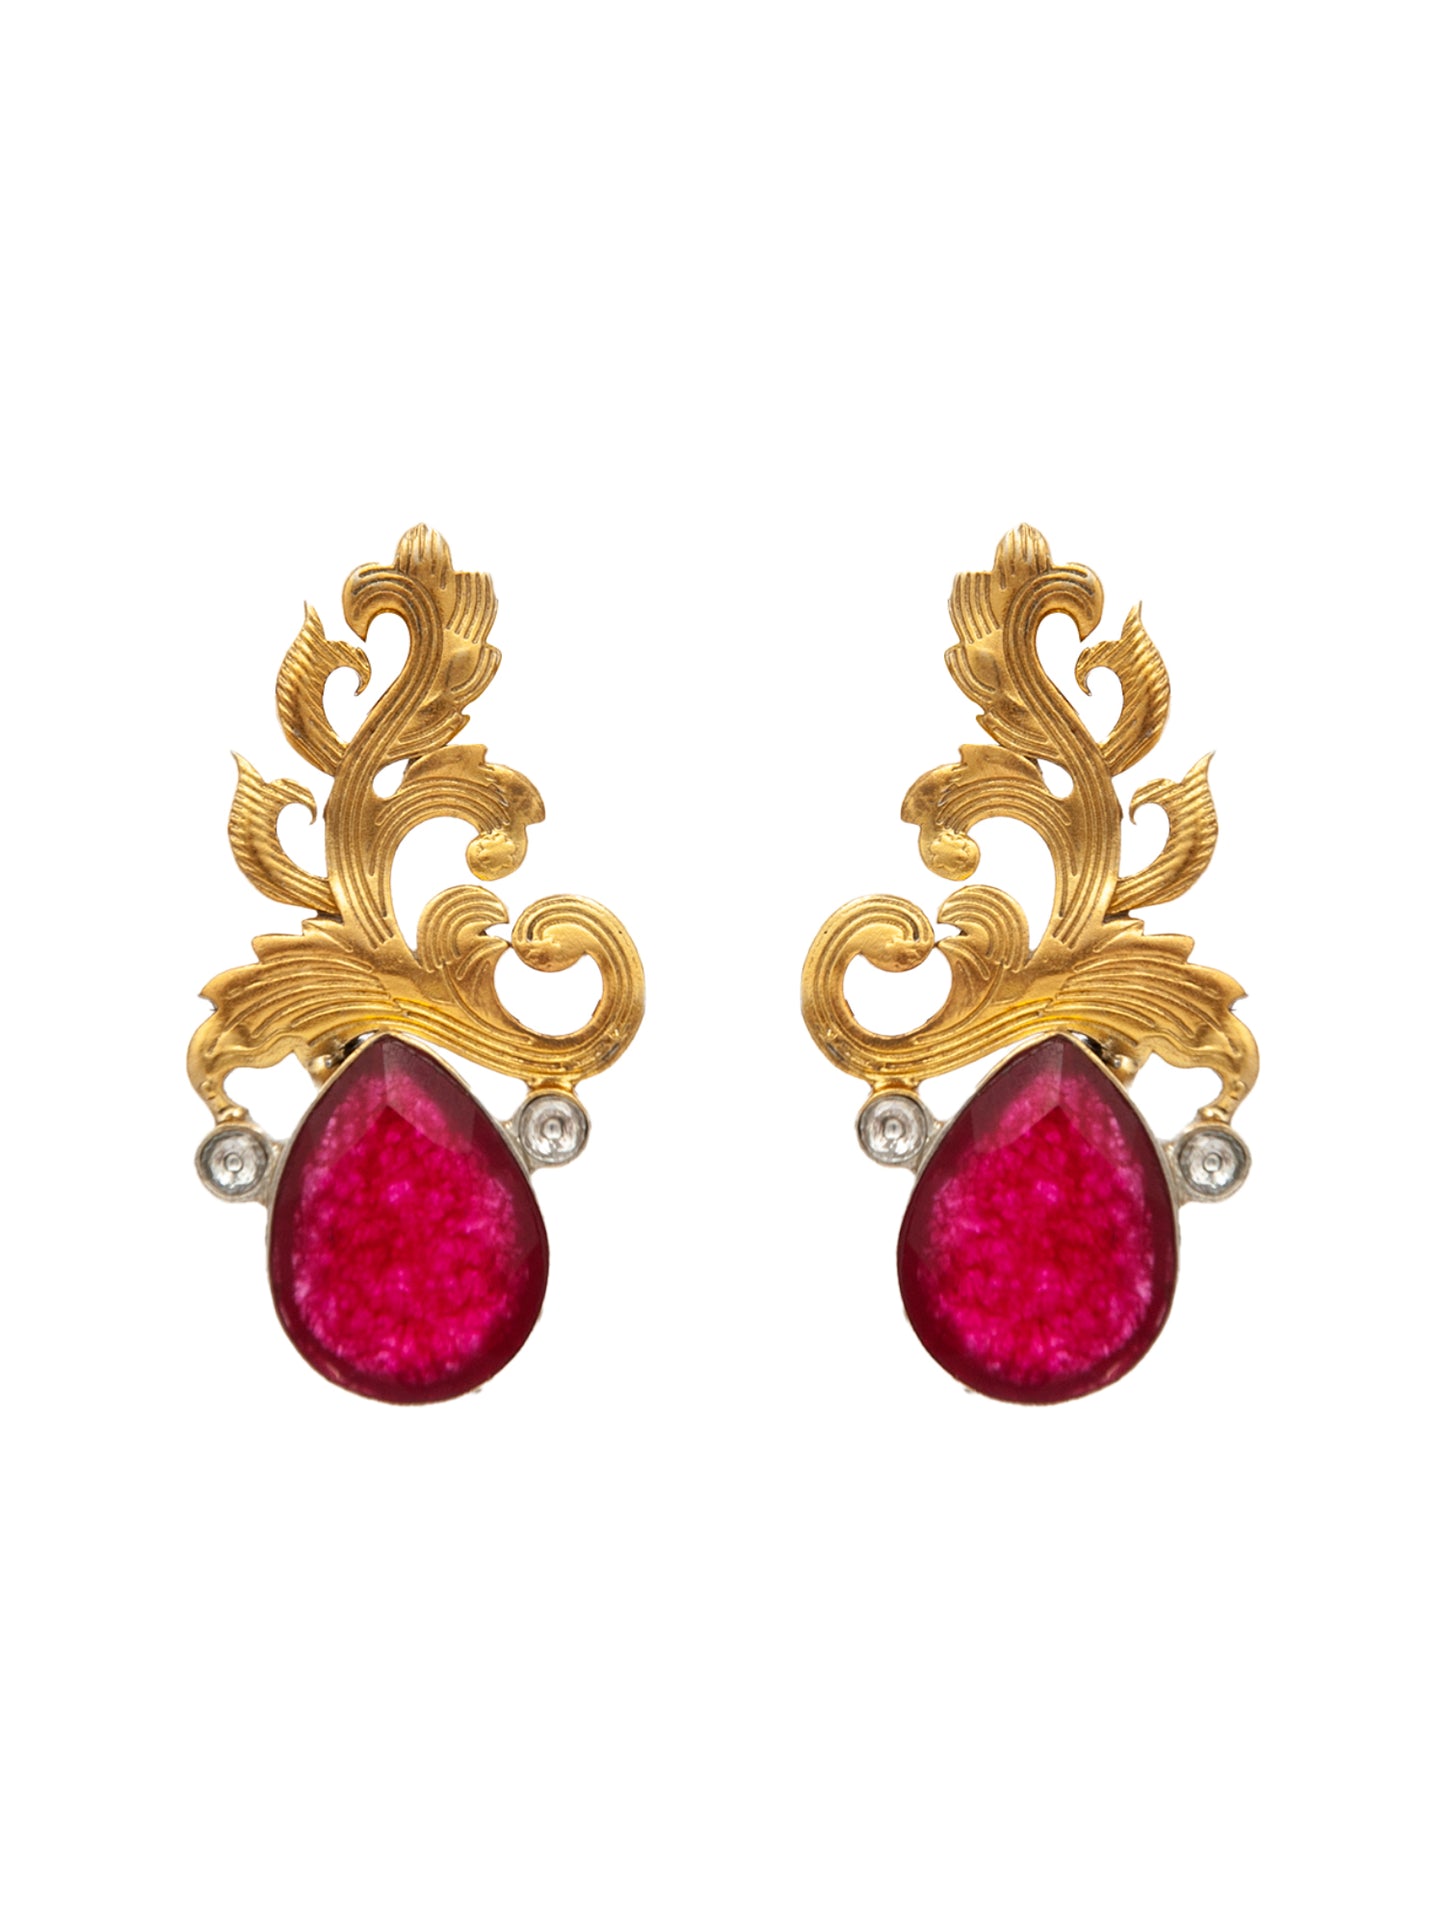 Nature's Grace: 925 Sterling Silver Leaf Earrings with Dyed Ruby